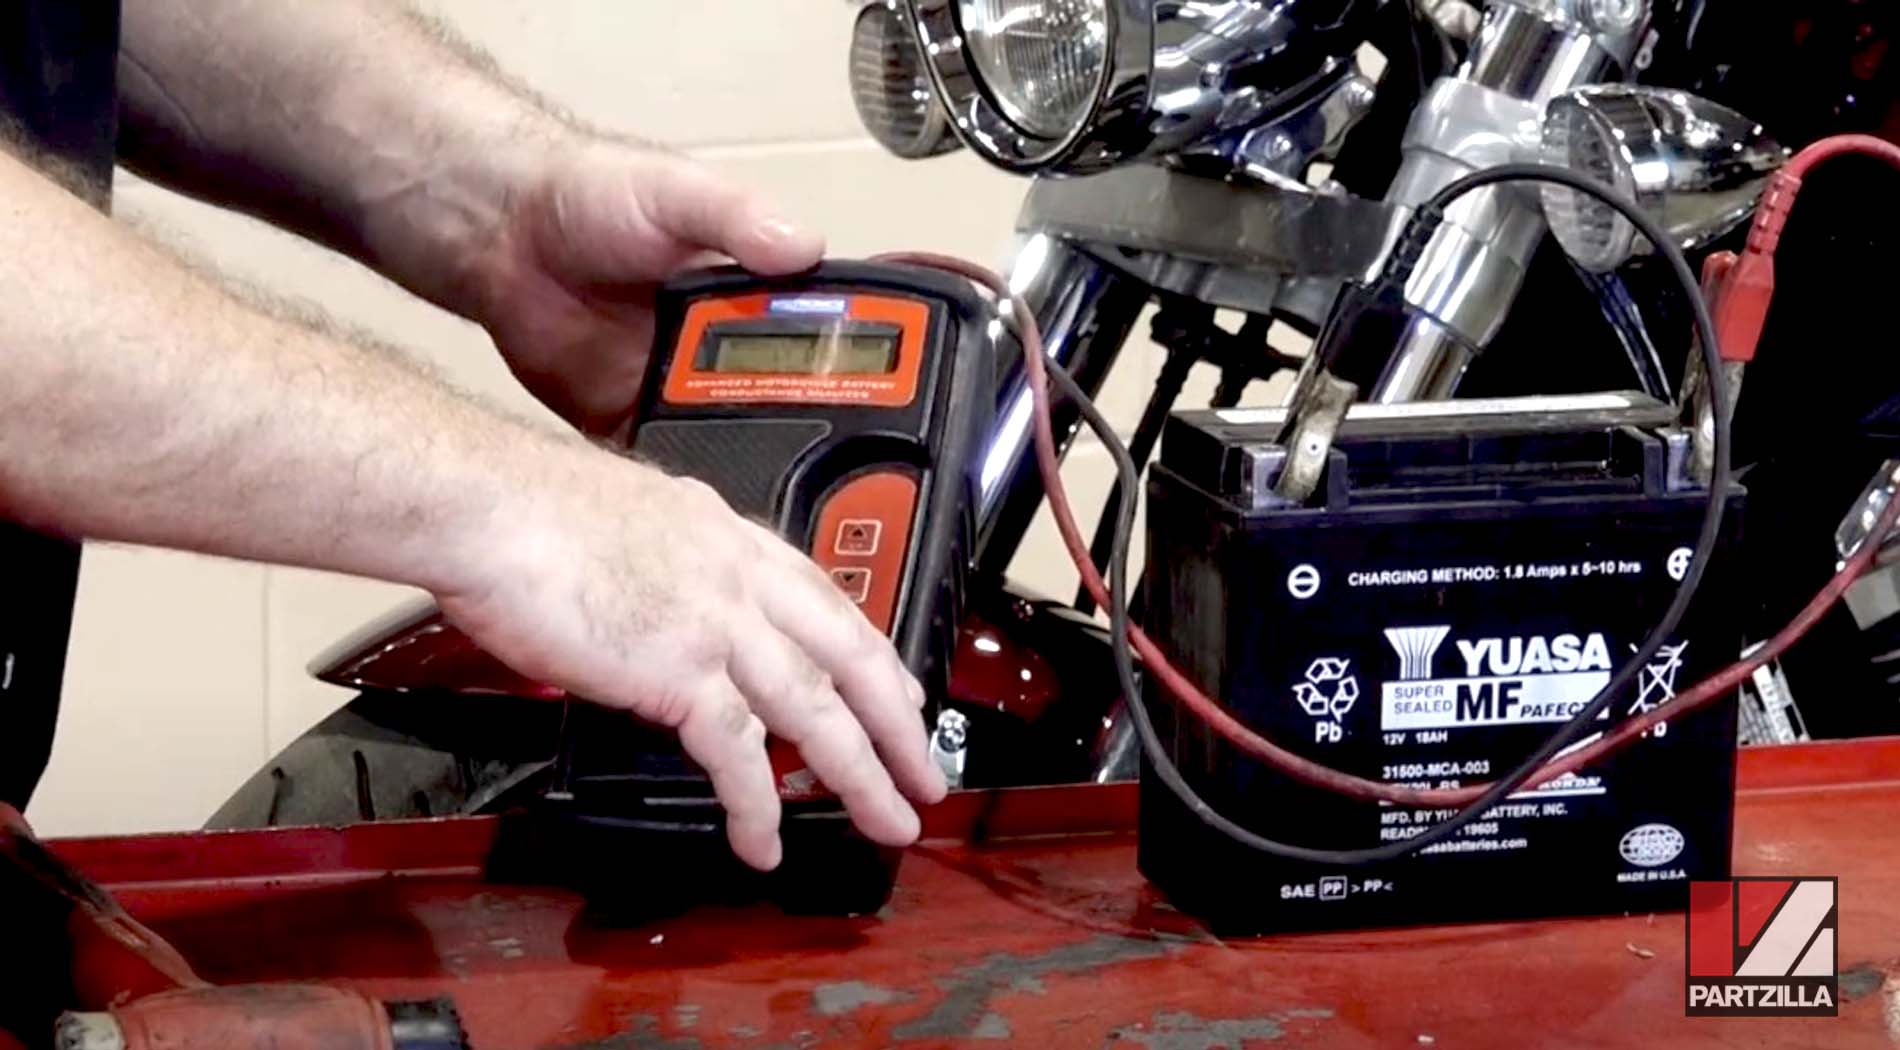 Motorcycle battery problems Q&A